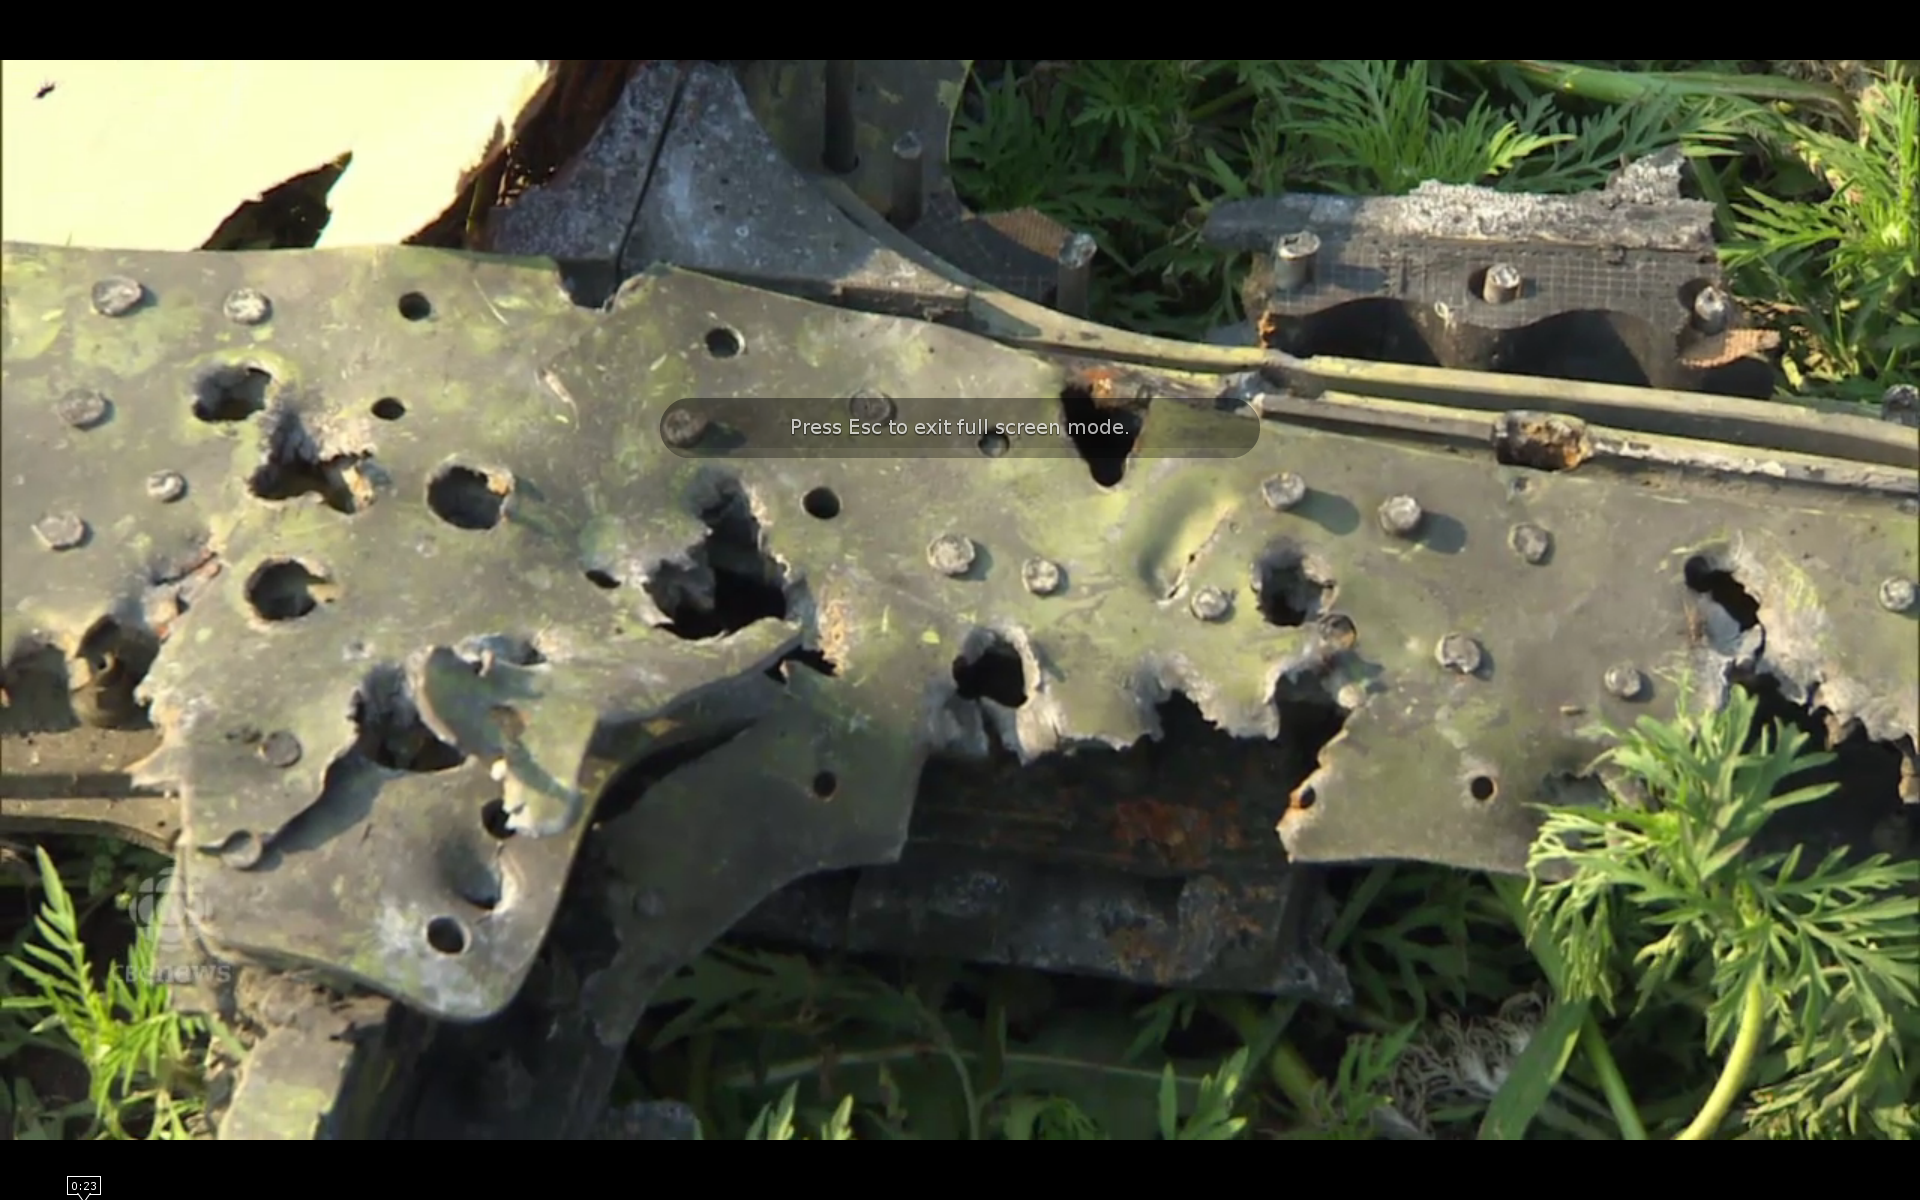 http://www.shoutwiki.com/w/images/acloserlookonsyria/a/ae/MH17_cockpit_right_window_frame_bullet_holes.png